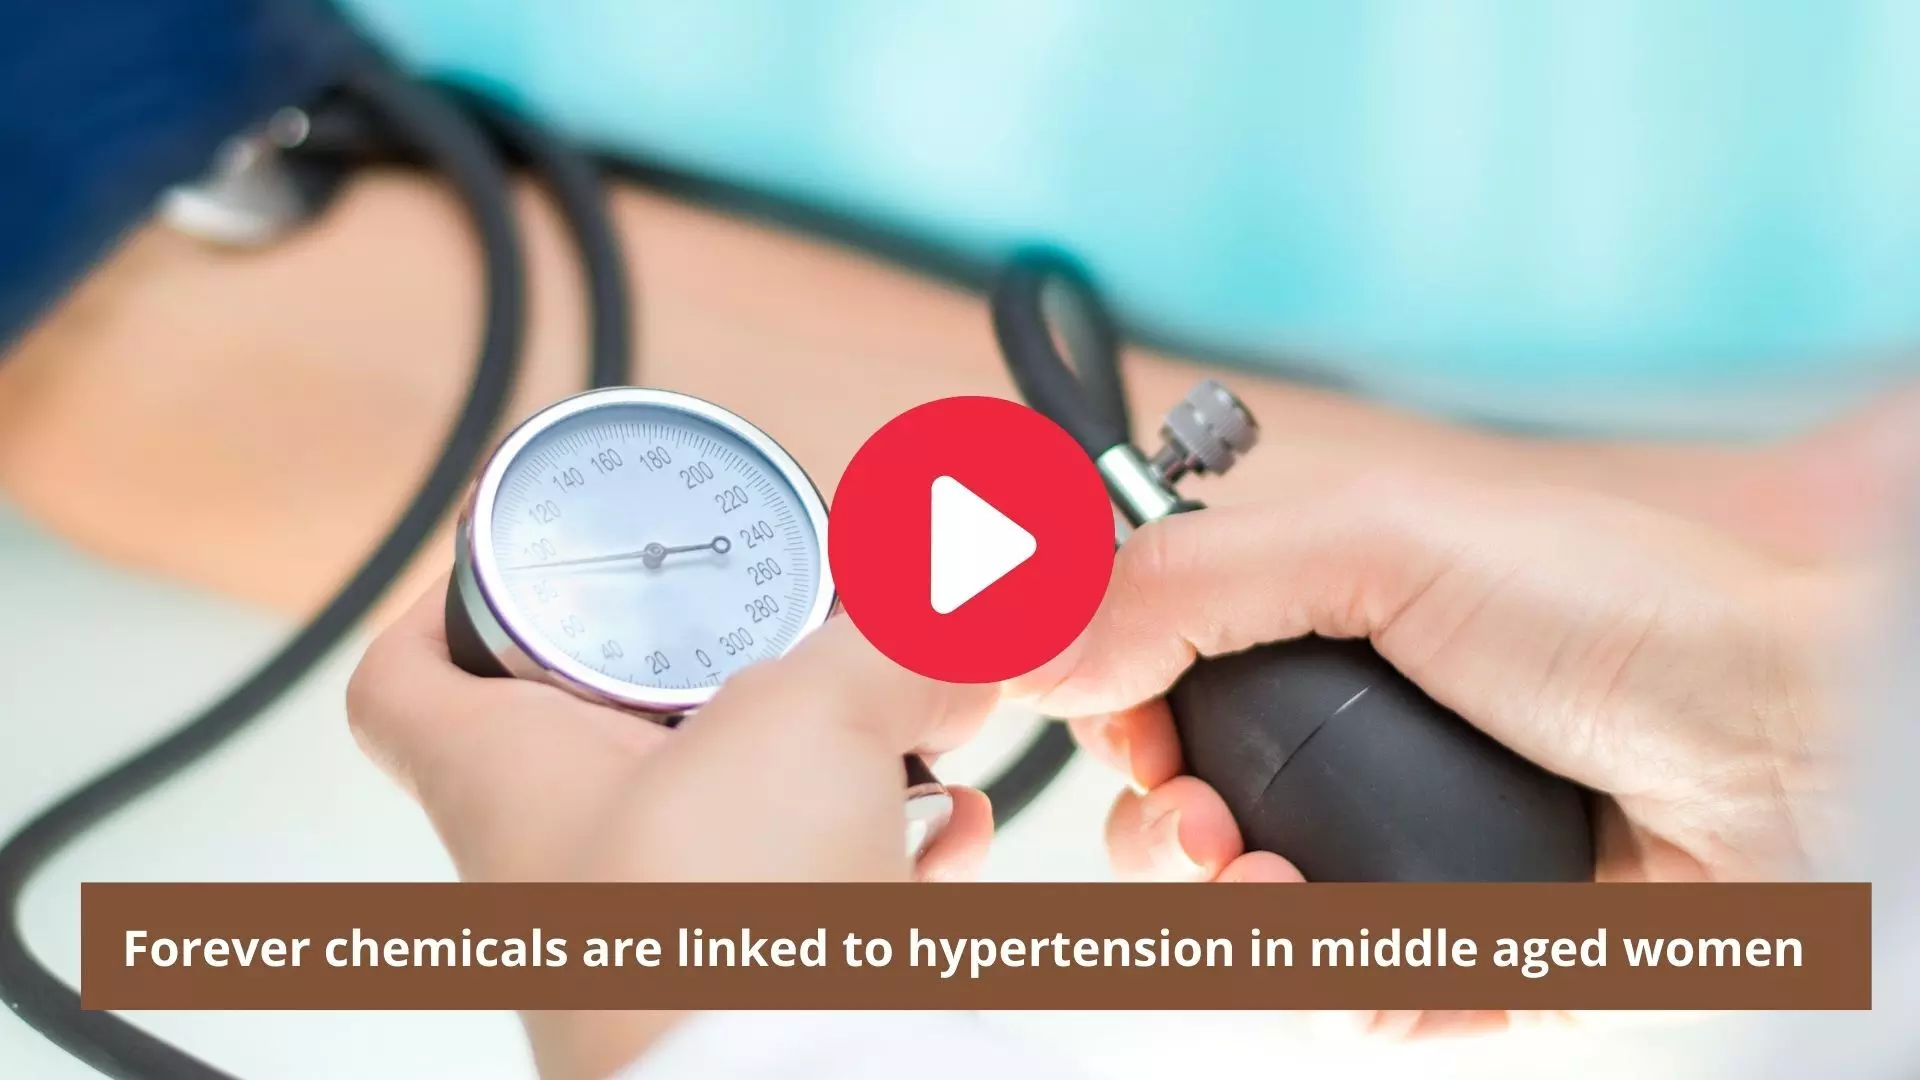 Forever chemicals are linked to hypertension in middle aged women